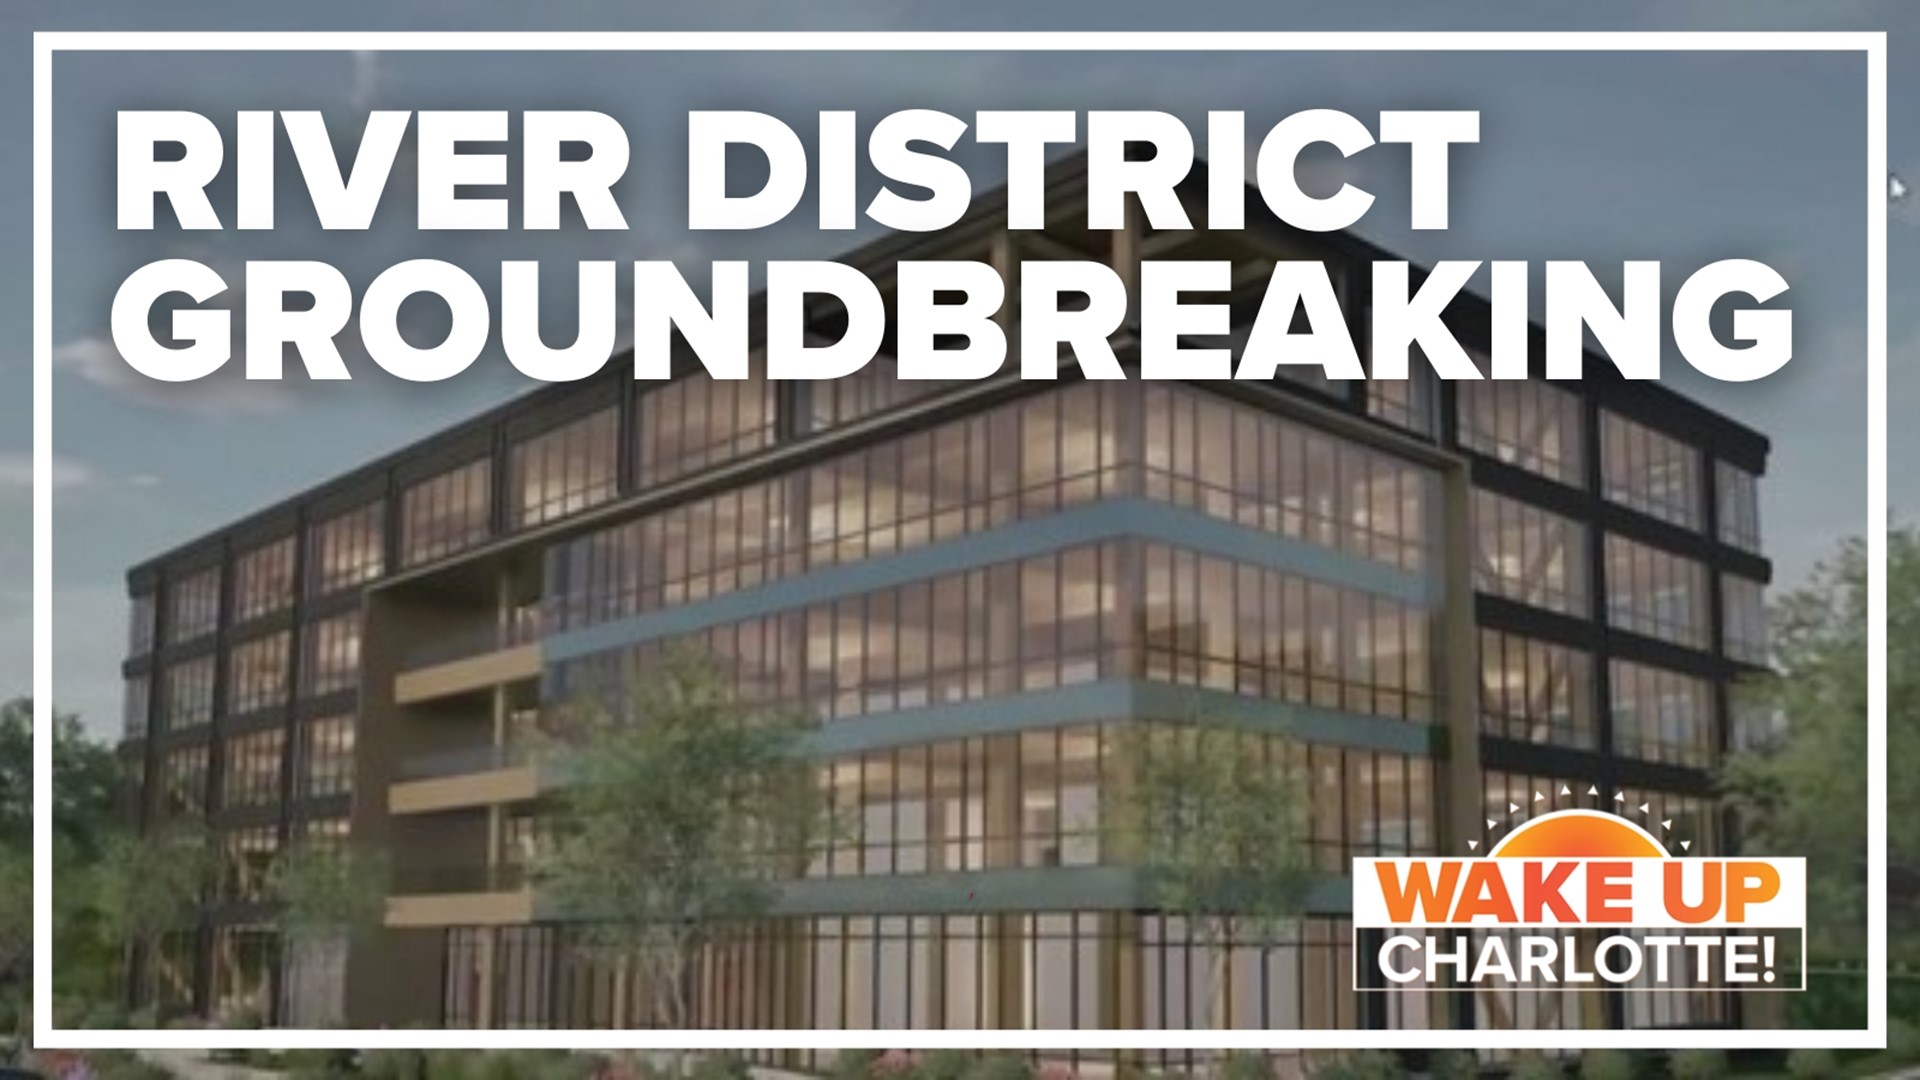 A massive project that will likely revolutionize west Charlotte is set to break ground.